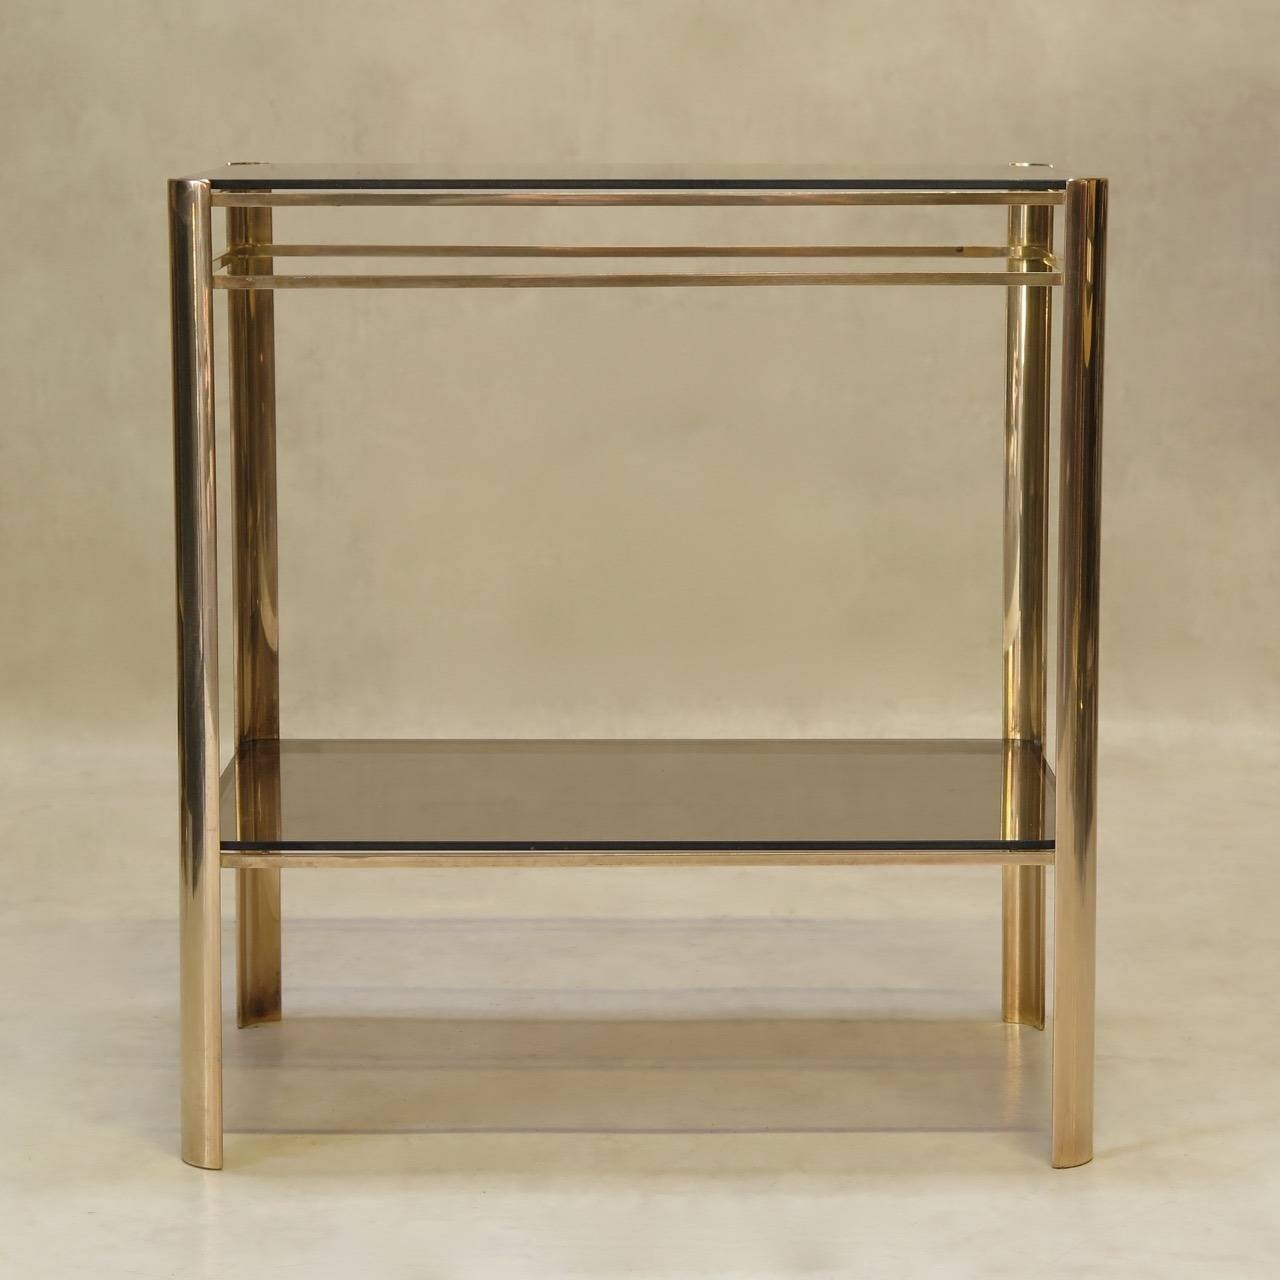 A bronze and glass two-tier side table by Jacques Quinet for the Maison Malabert.

Inset glass shelves. Manufacturer's mark engraved on the inside.